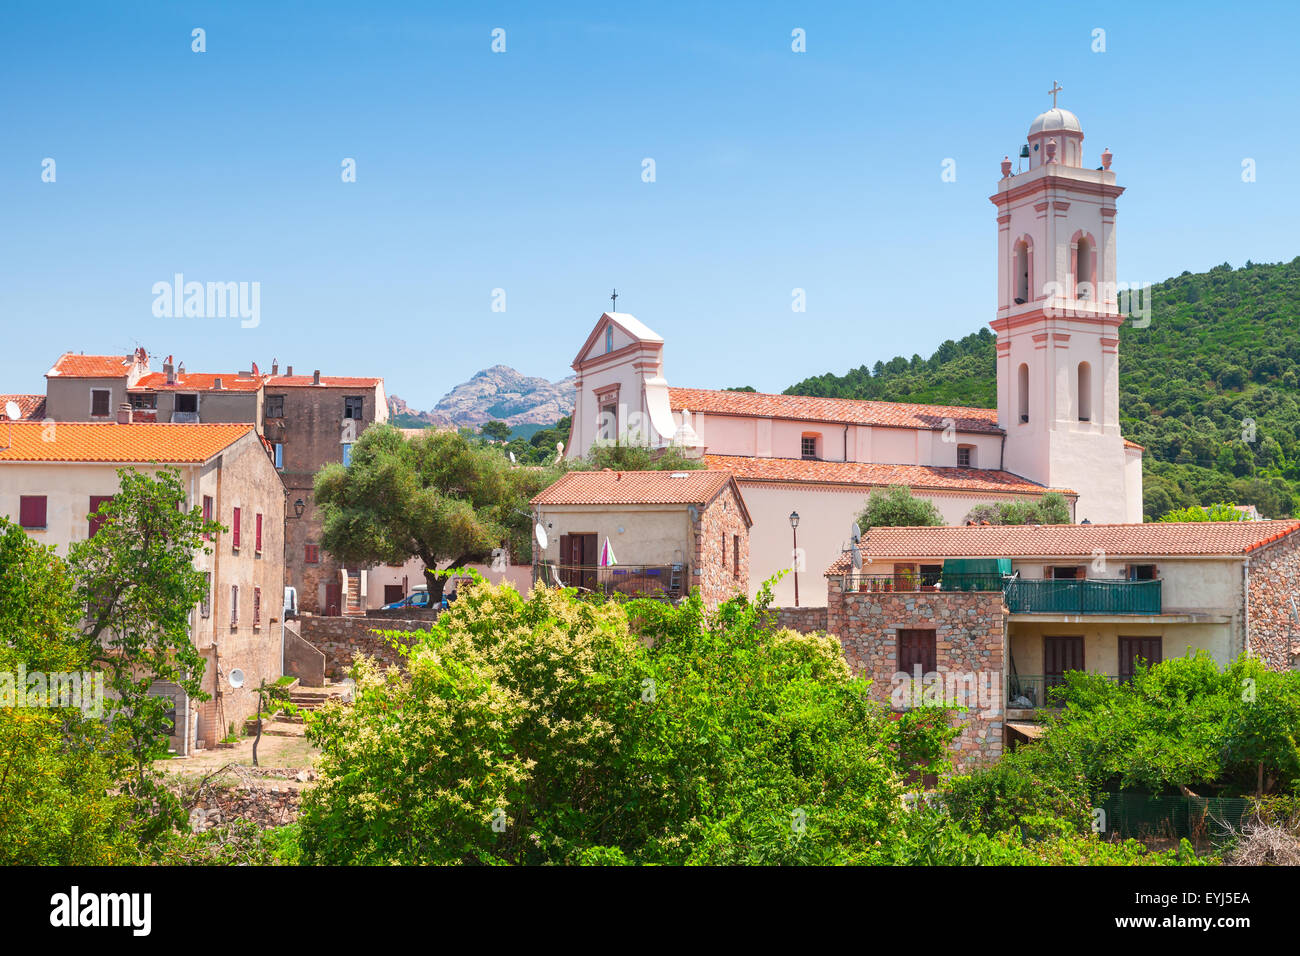 Small Corsican town landscape, old living houses with red tile roofs and bell tower. Piana, South Corsica, France Stock Photo